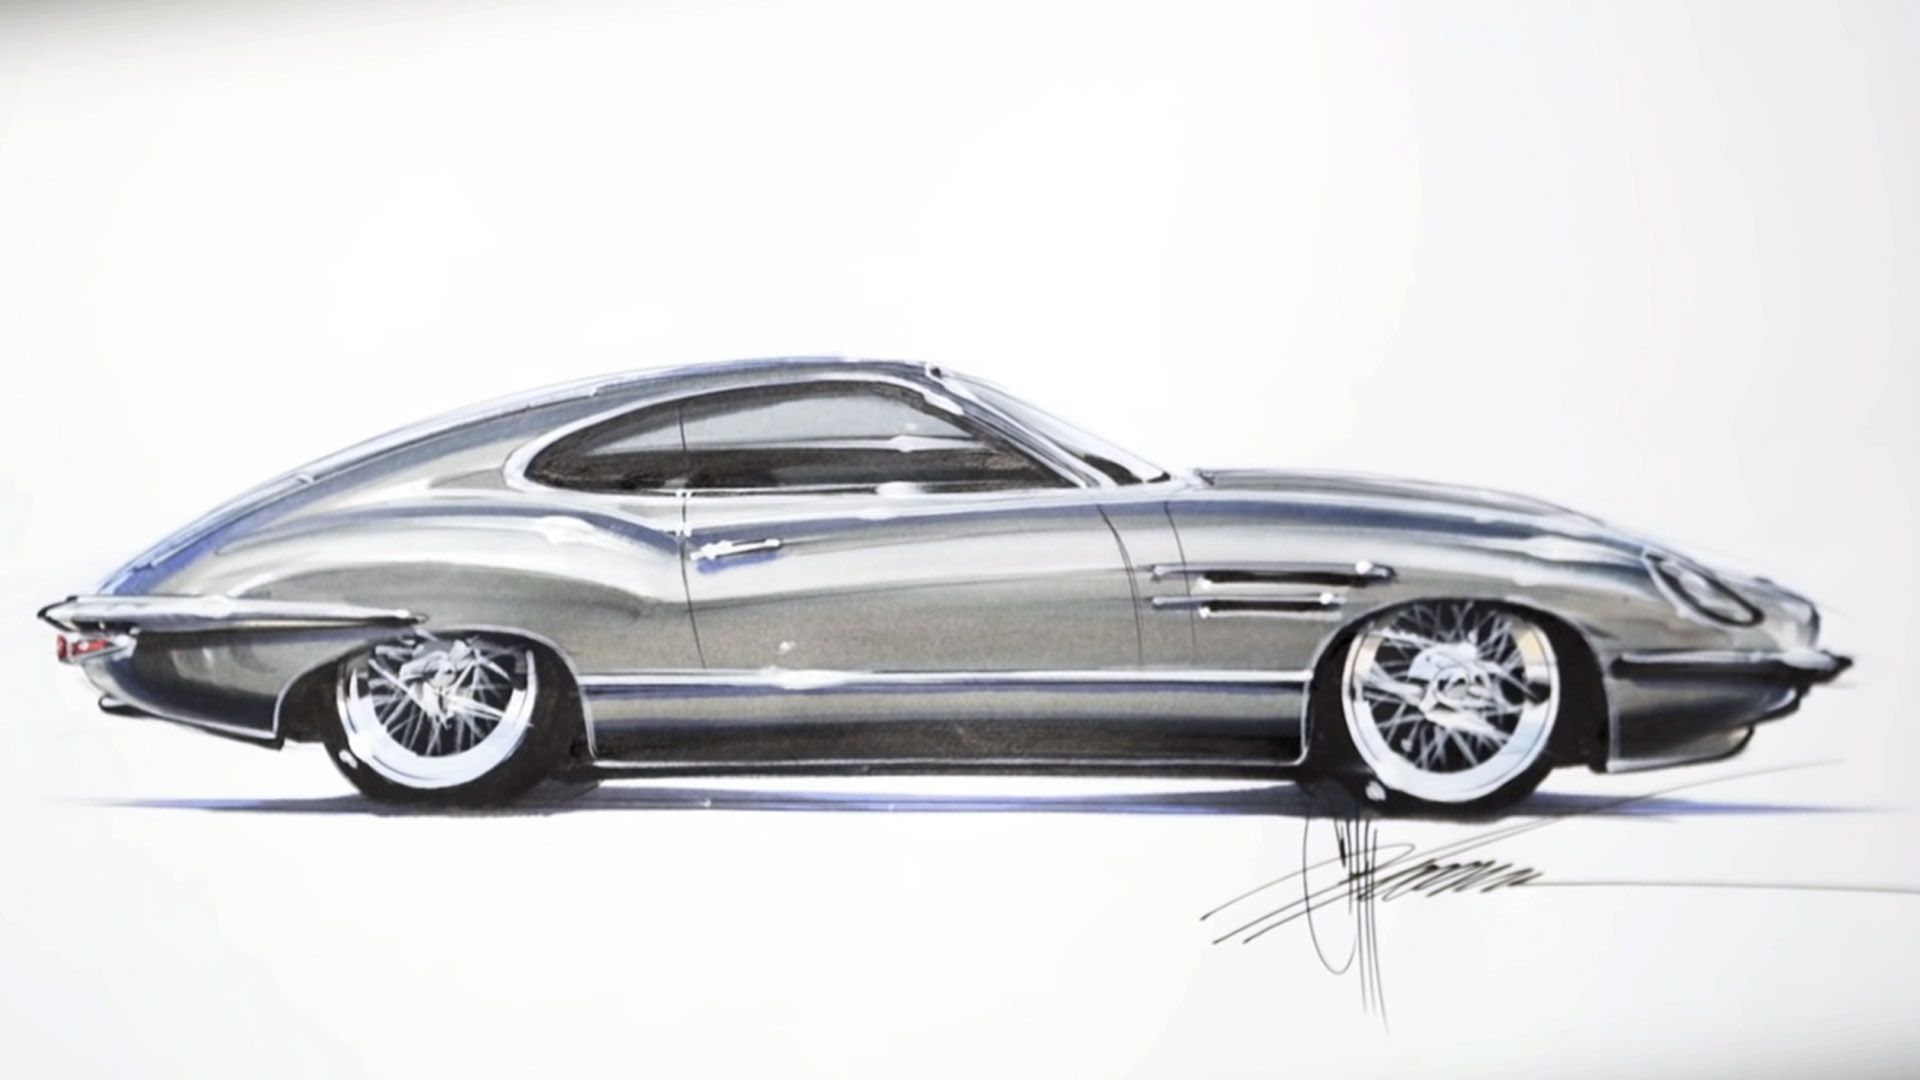 Chip Foose Shows You How To Render the Hot Rod of Your Dreams